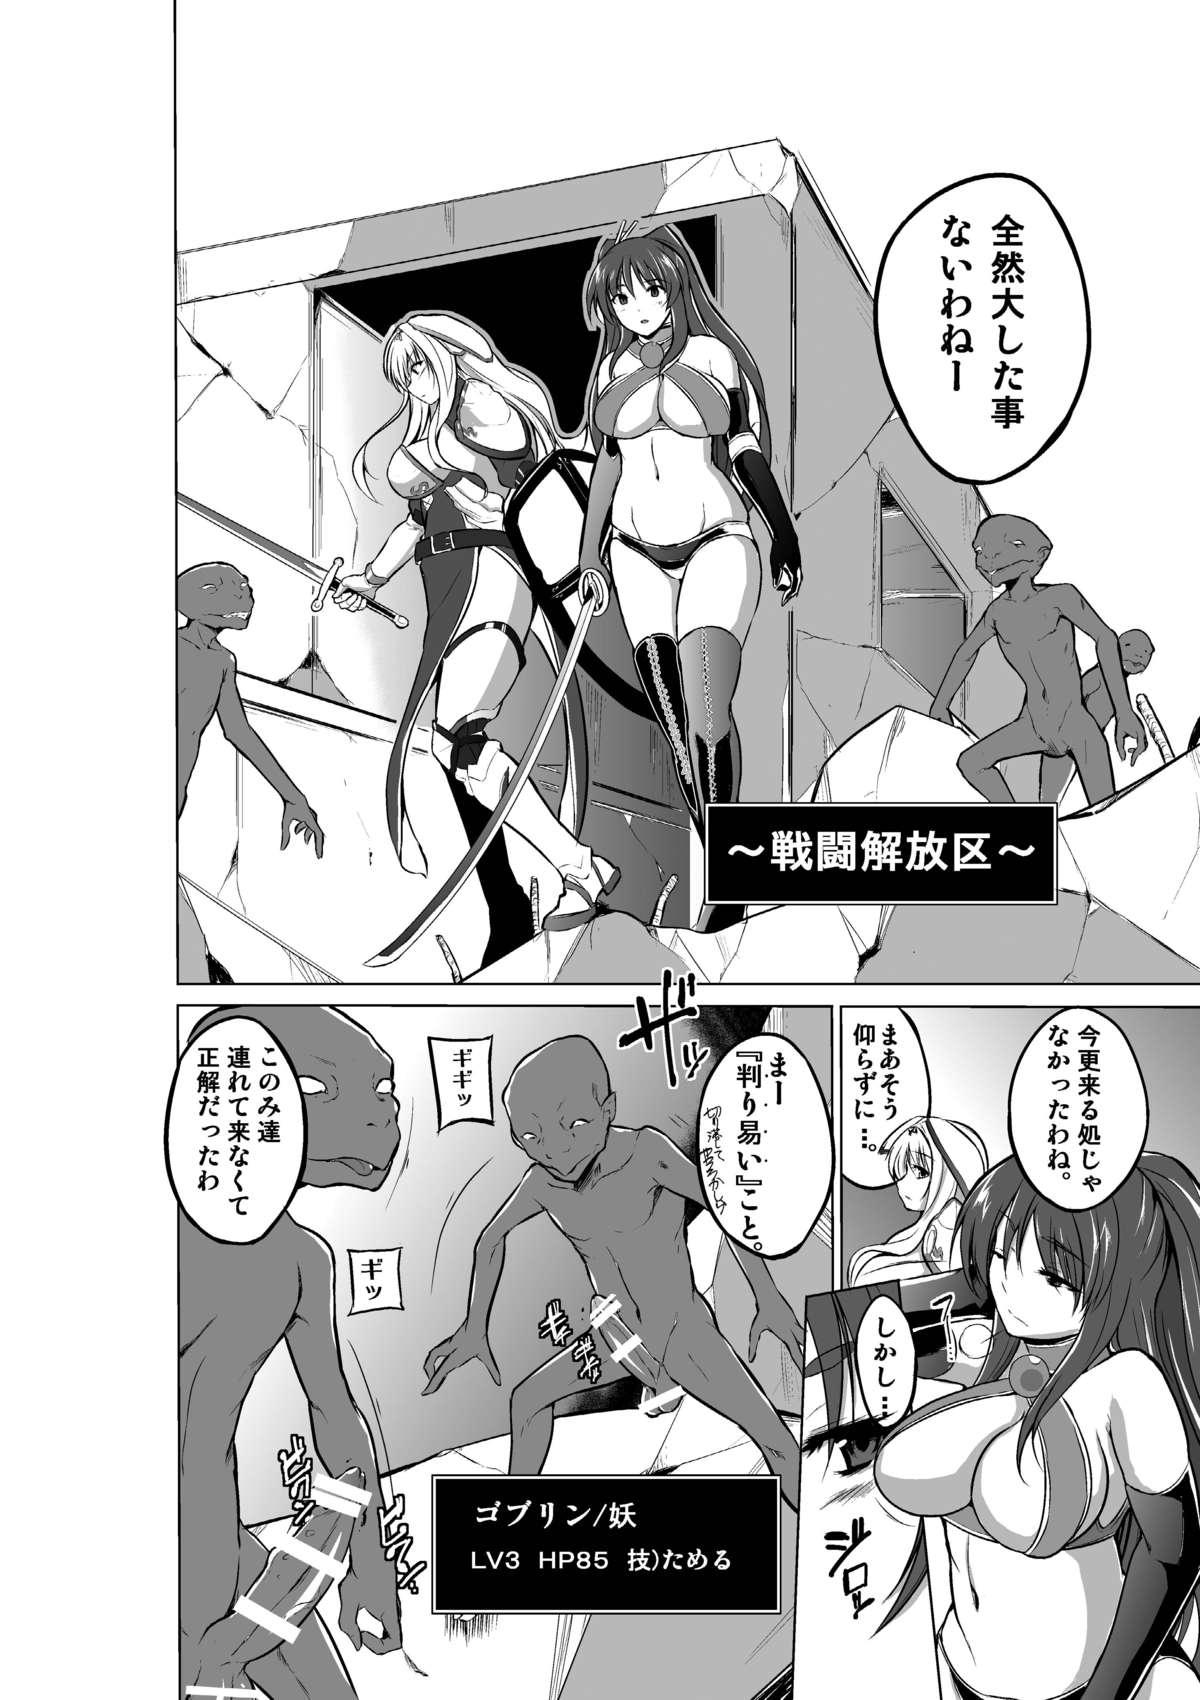 Indian Sex Dungeon Travelers - Sasara no Himegoto 2 - Toheart2 Transsexual - Page 4